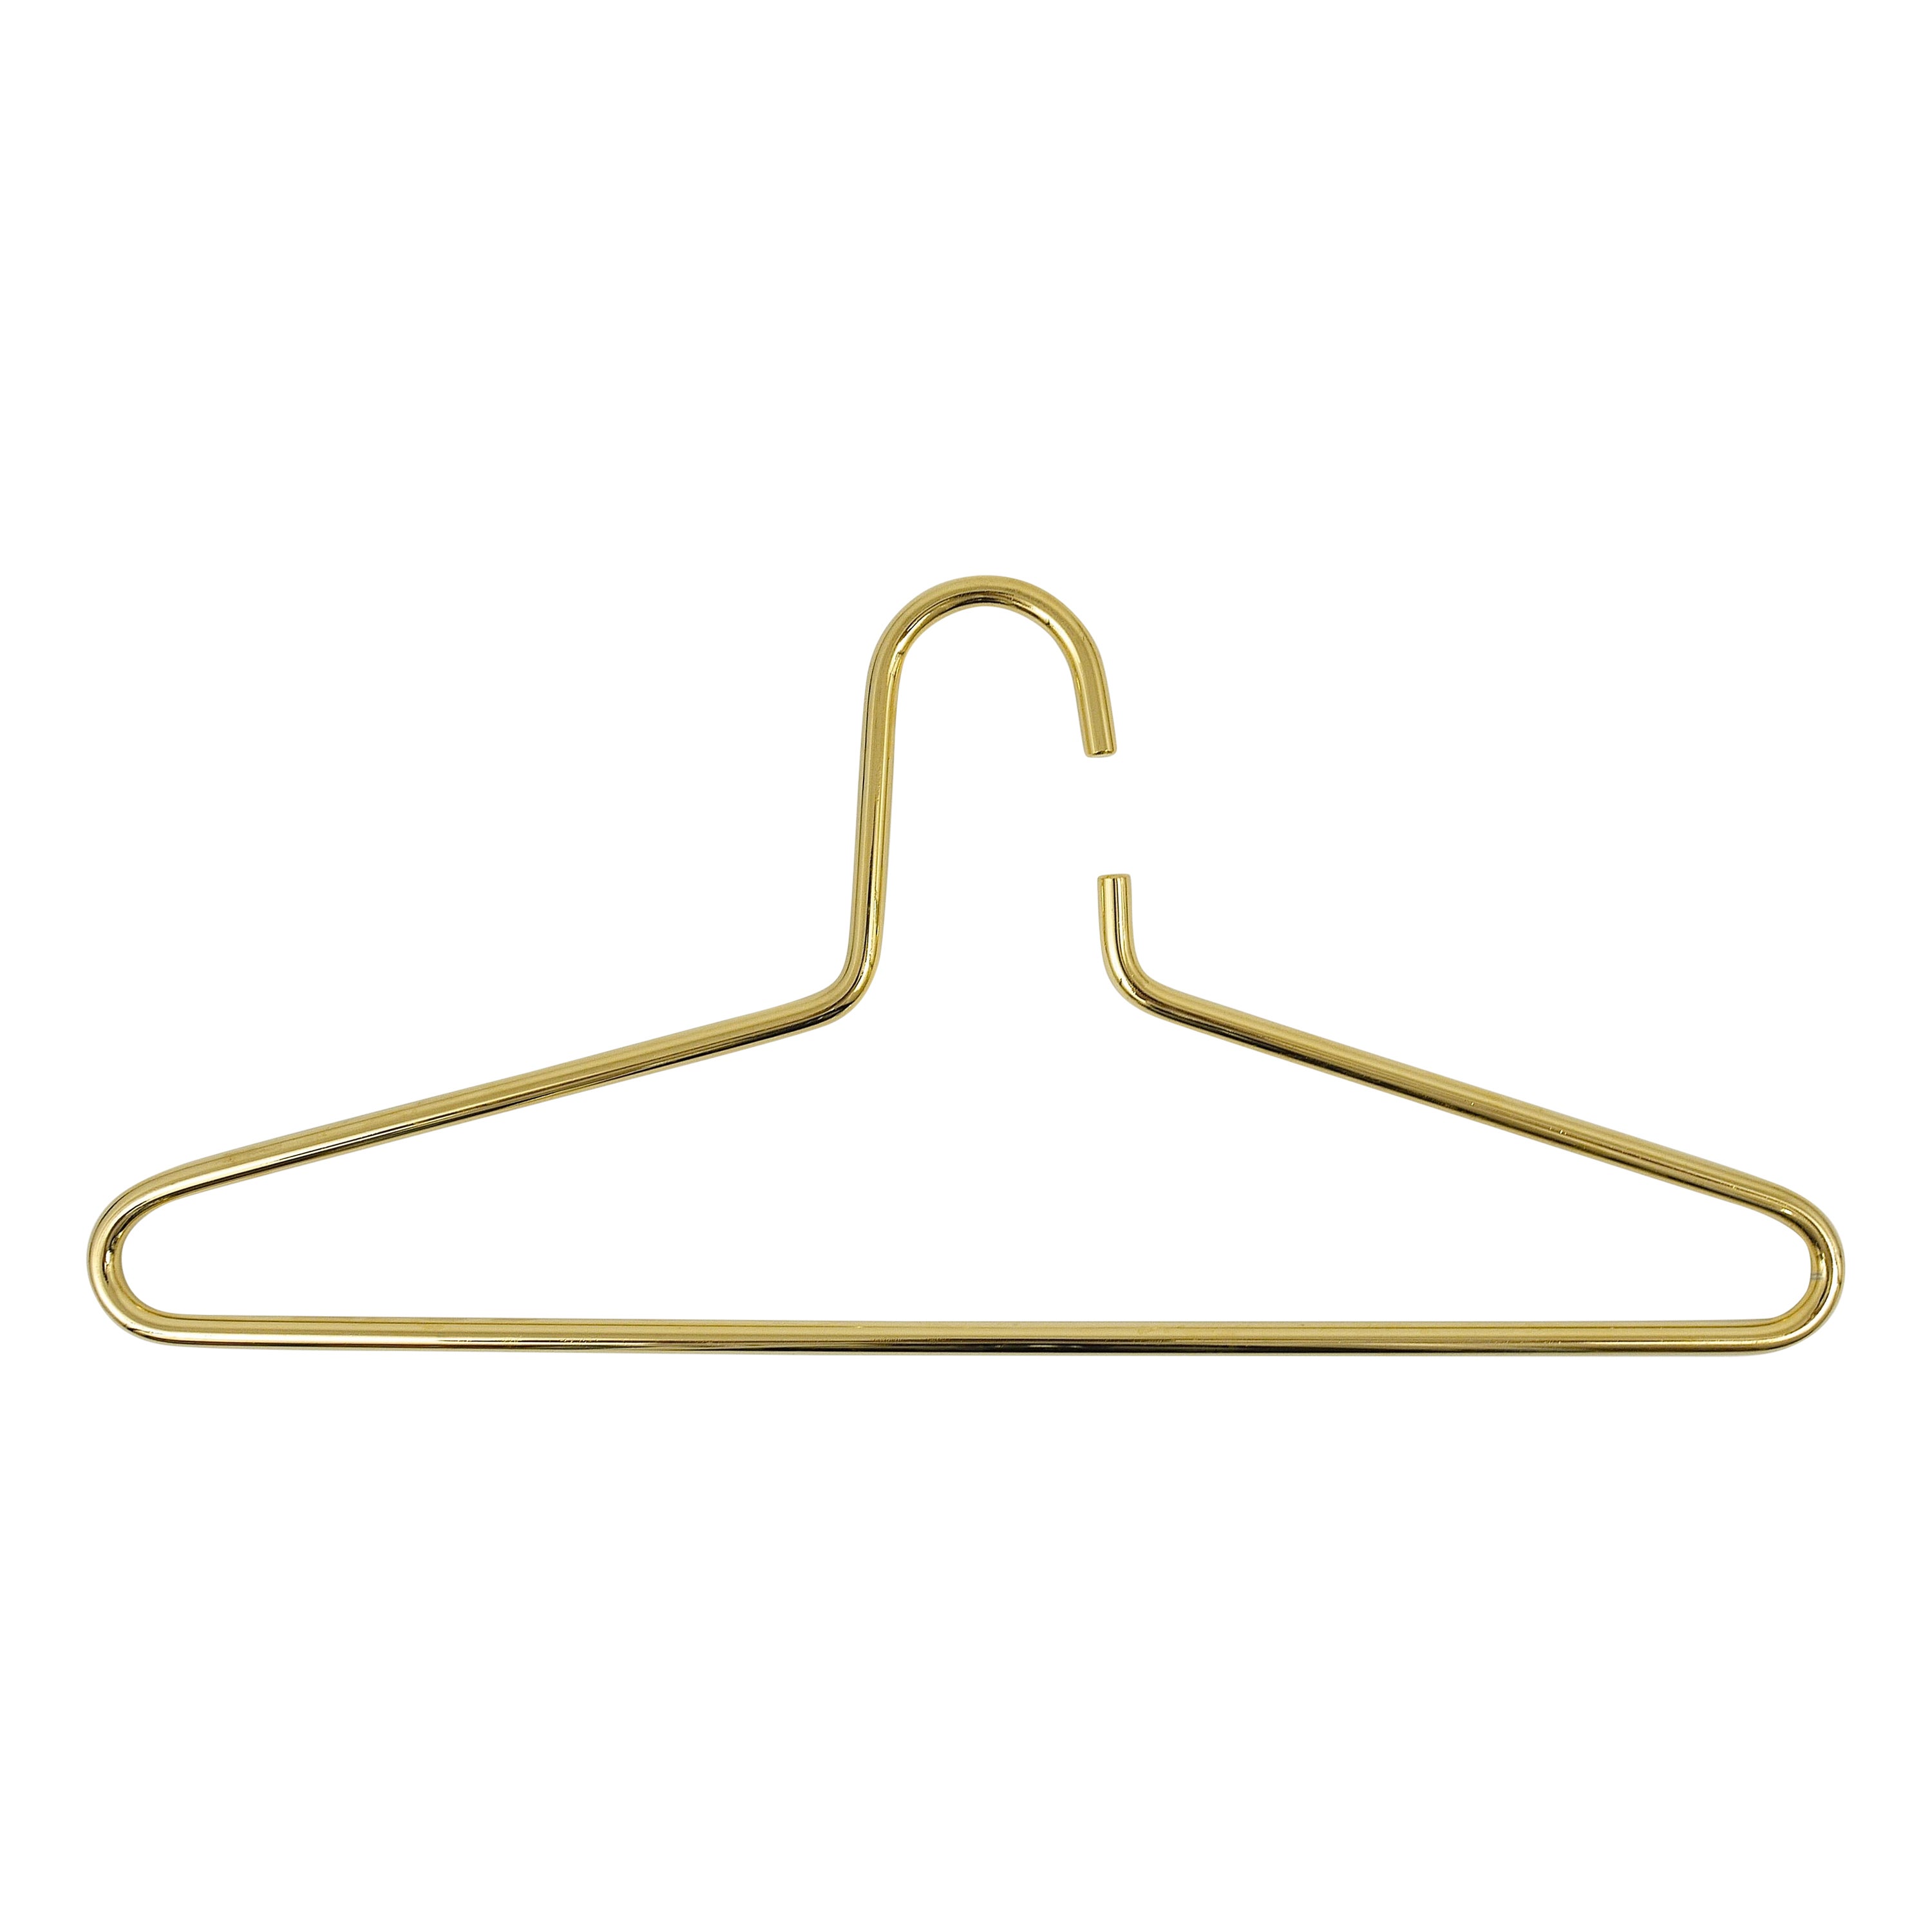 Up to 12 Austrian Modernist Solid Gold-Plated Coat Hangers from the 1970s For Sale